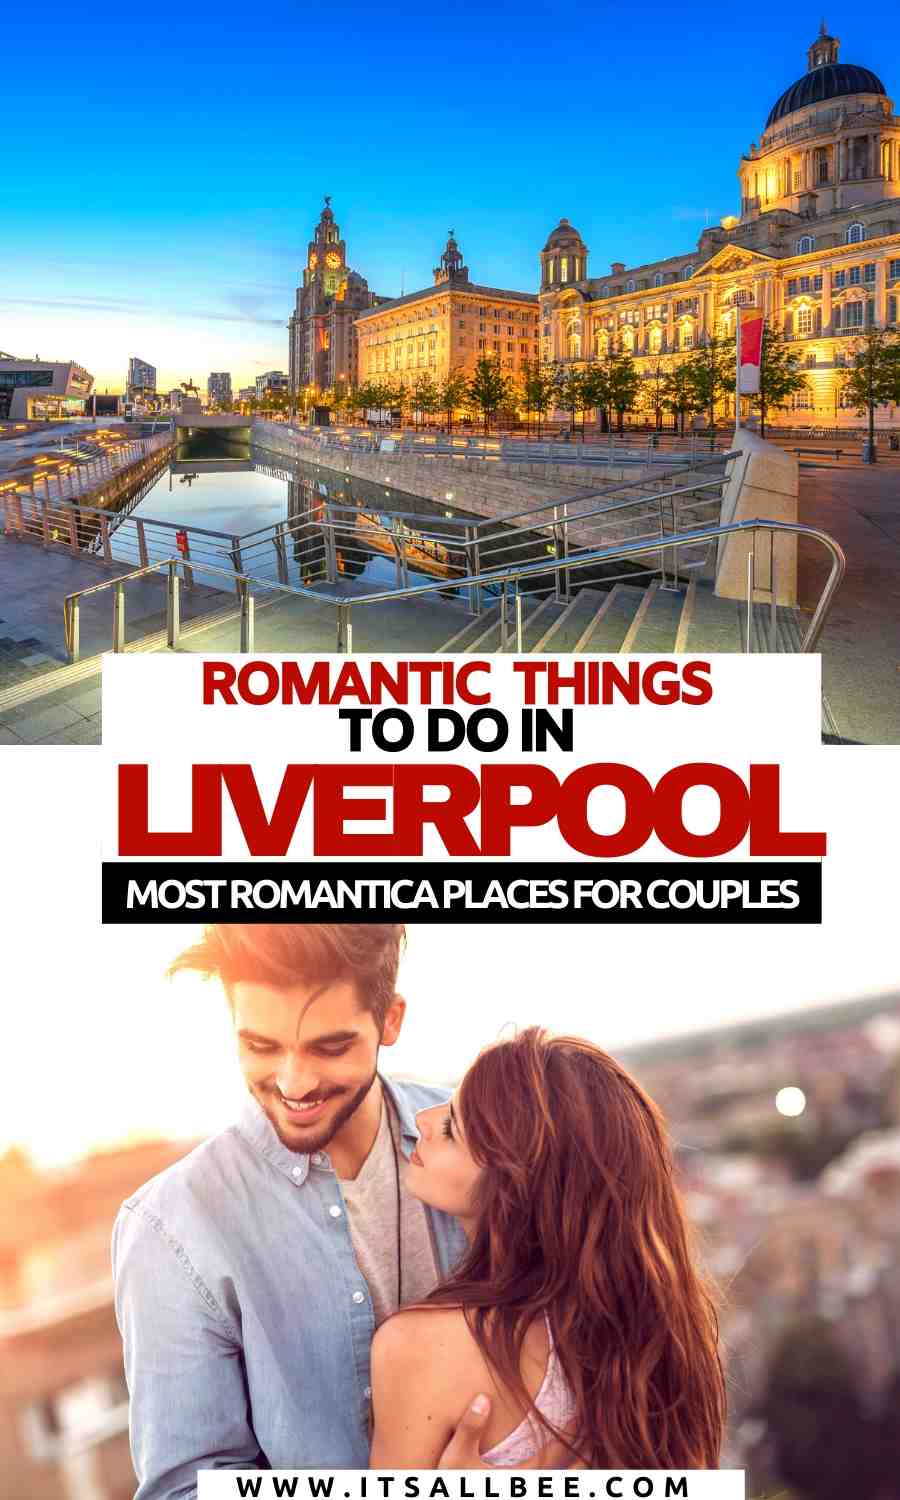 Romantic things to do for couples in Liverpool